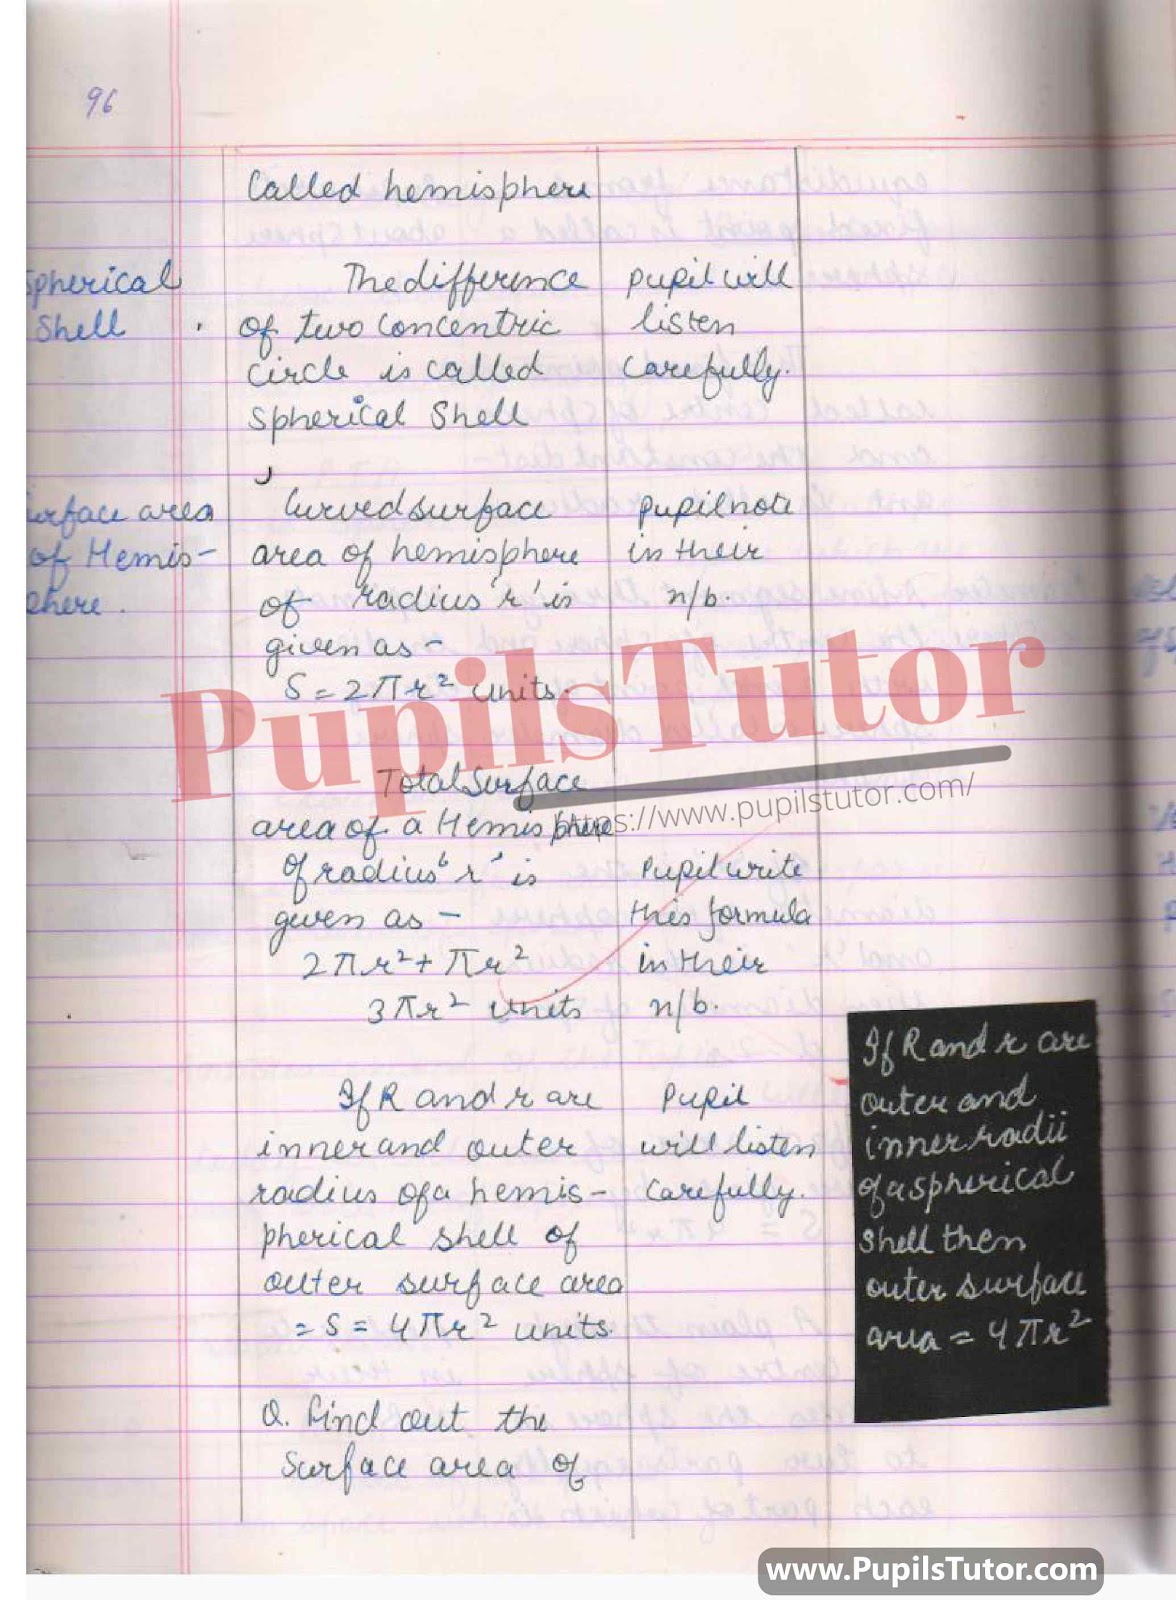 BED, DELED, BTC, BSTC, M.ED, DED And NIOS Teaching Of Mathematics Innovative Digital Lesson Plan Format On Surface Area And Volume Of Sphere Topic For Class 4th 5th 6th 7th 8th 9th, 10th, 11th, 12th  – [Page And Photo 4] – pupilstutor.com